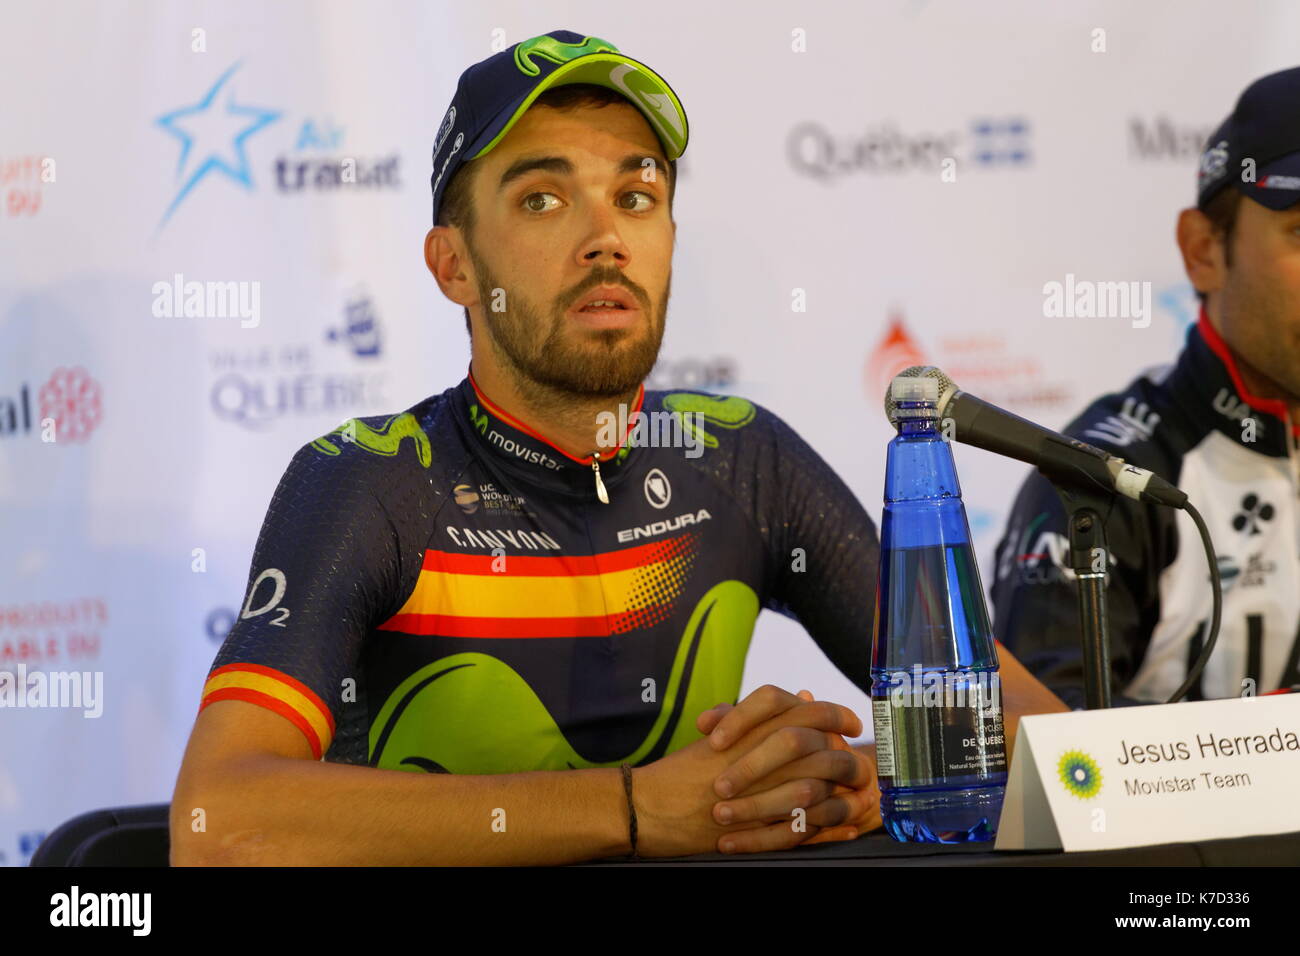 Montreal, Canada. 10/09/2017. Jesus Herrada of Moviestar Team at the post race news conference following the Grand Prix Cycliste of Montreal race. Stock Photo